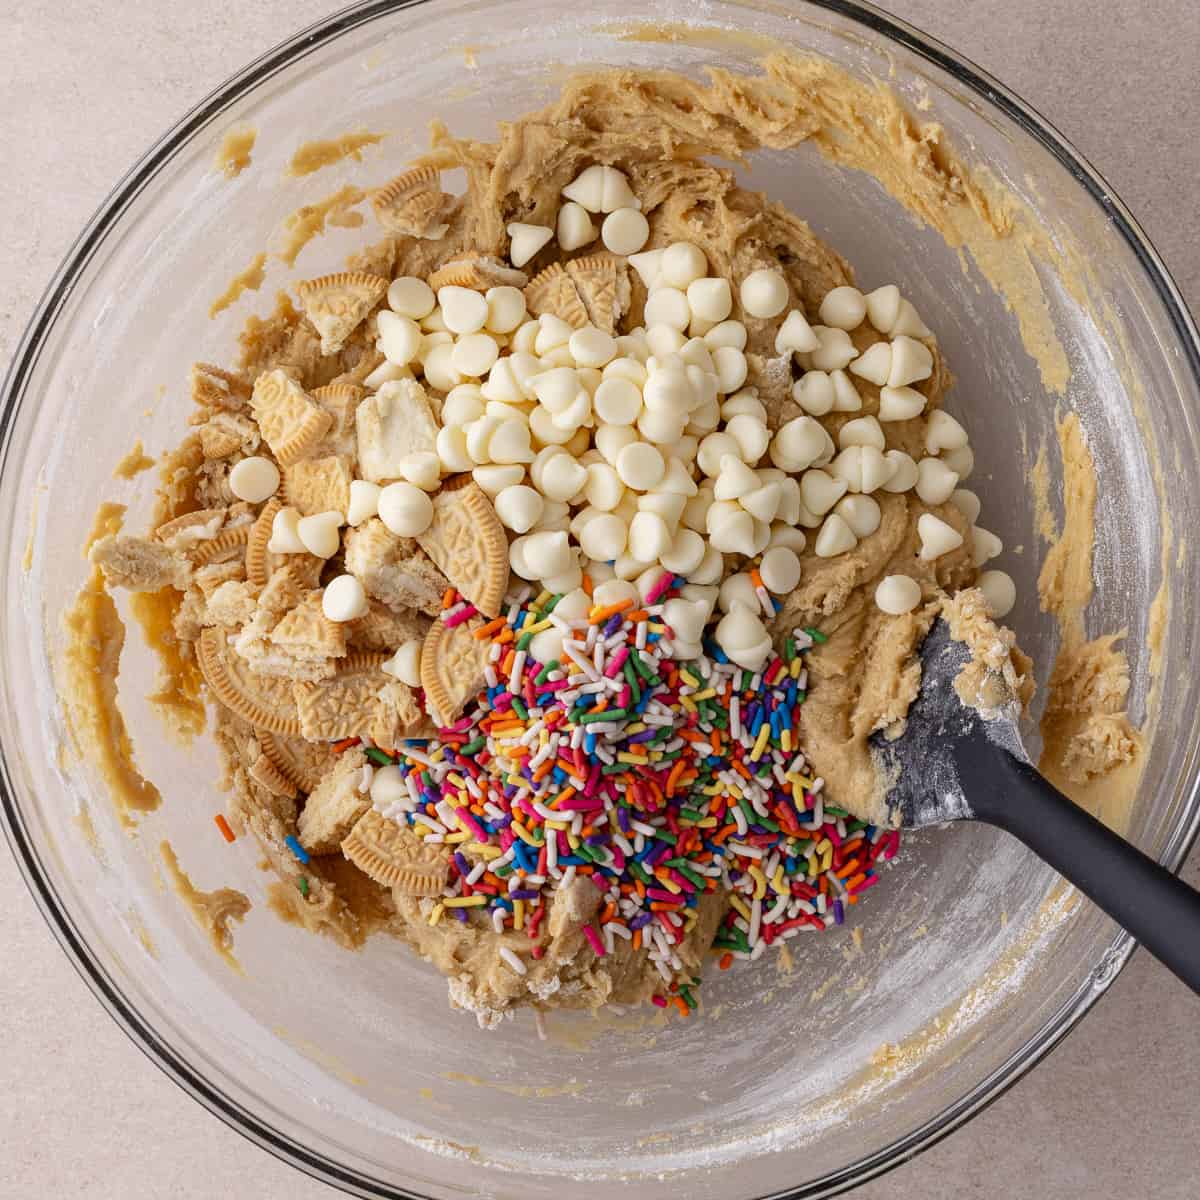 Crushed golden Oreos, sprinkles and white chocolate chips added to batter